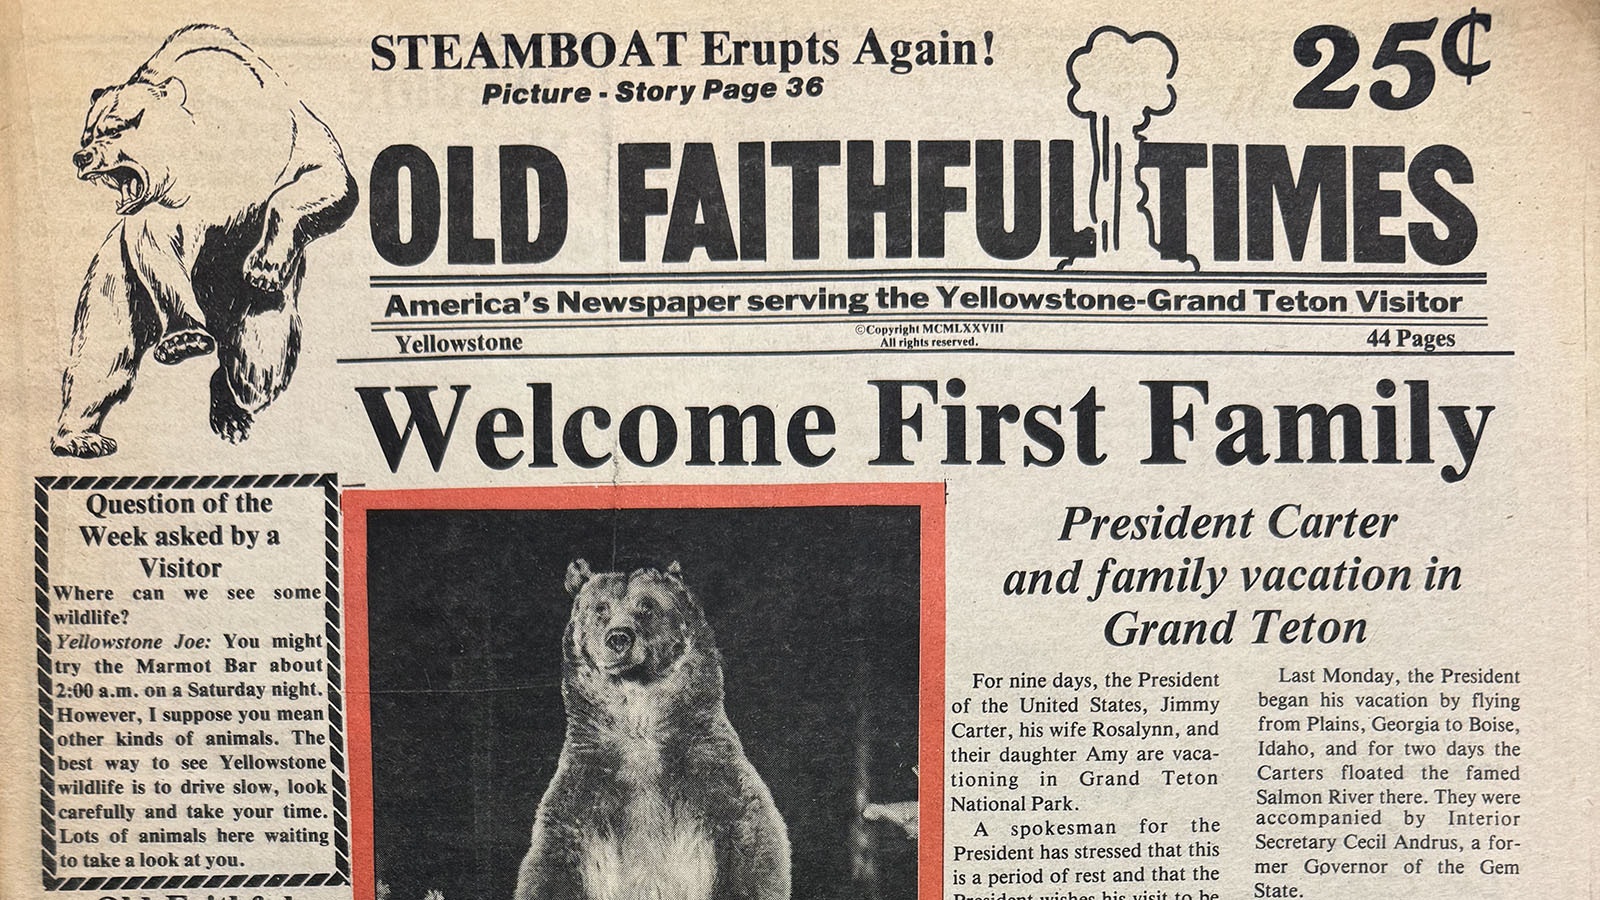 From 1978 and 1982, the Old Faithful Times was available in more than 100 locations across five states.